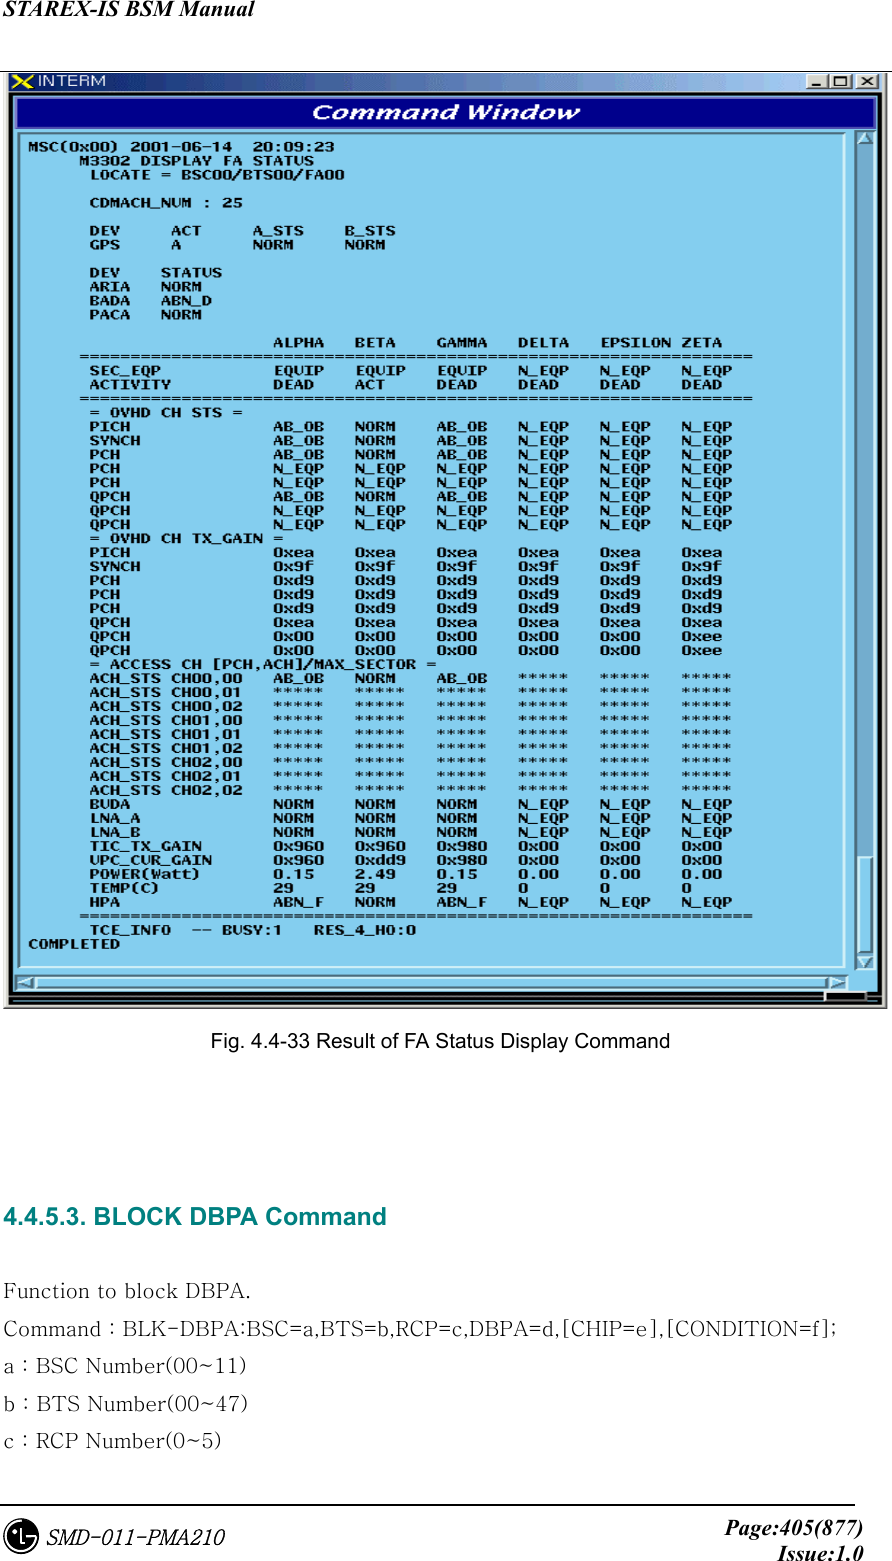 STAREX-IS BSM Manual     Page:405(877)Issue:1.0SMD-011-PMA210  Fig. 4.4-33 Result of FA Status Display Command    4.4.5.3. BLOCK DBPA Command  Function to block DBPA. Command : BLK-DBPA:BSC=a,BTS=b,RCP=c,DBPA=d,[CHIP=e],[CONDITION=f]; a : BSC Number(00~11) b : BTS Number(00~47) c : RCP Number(0~5) 